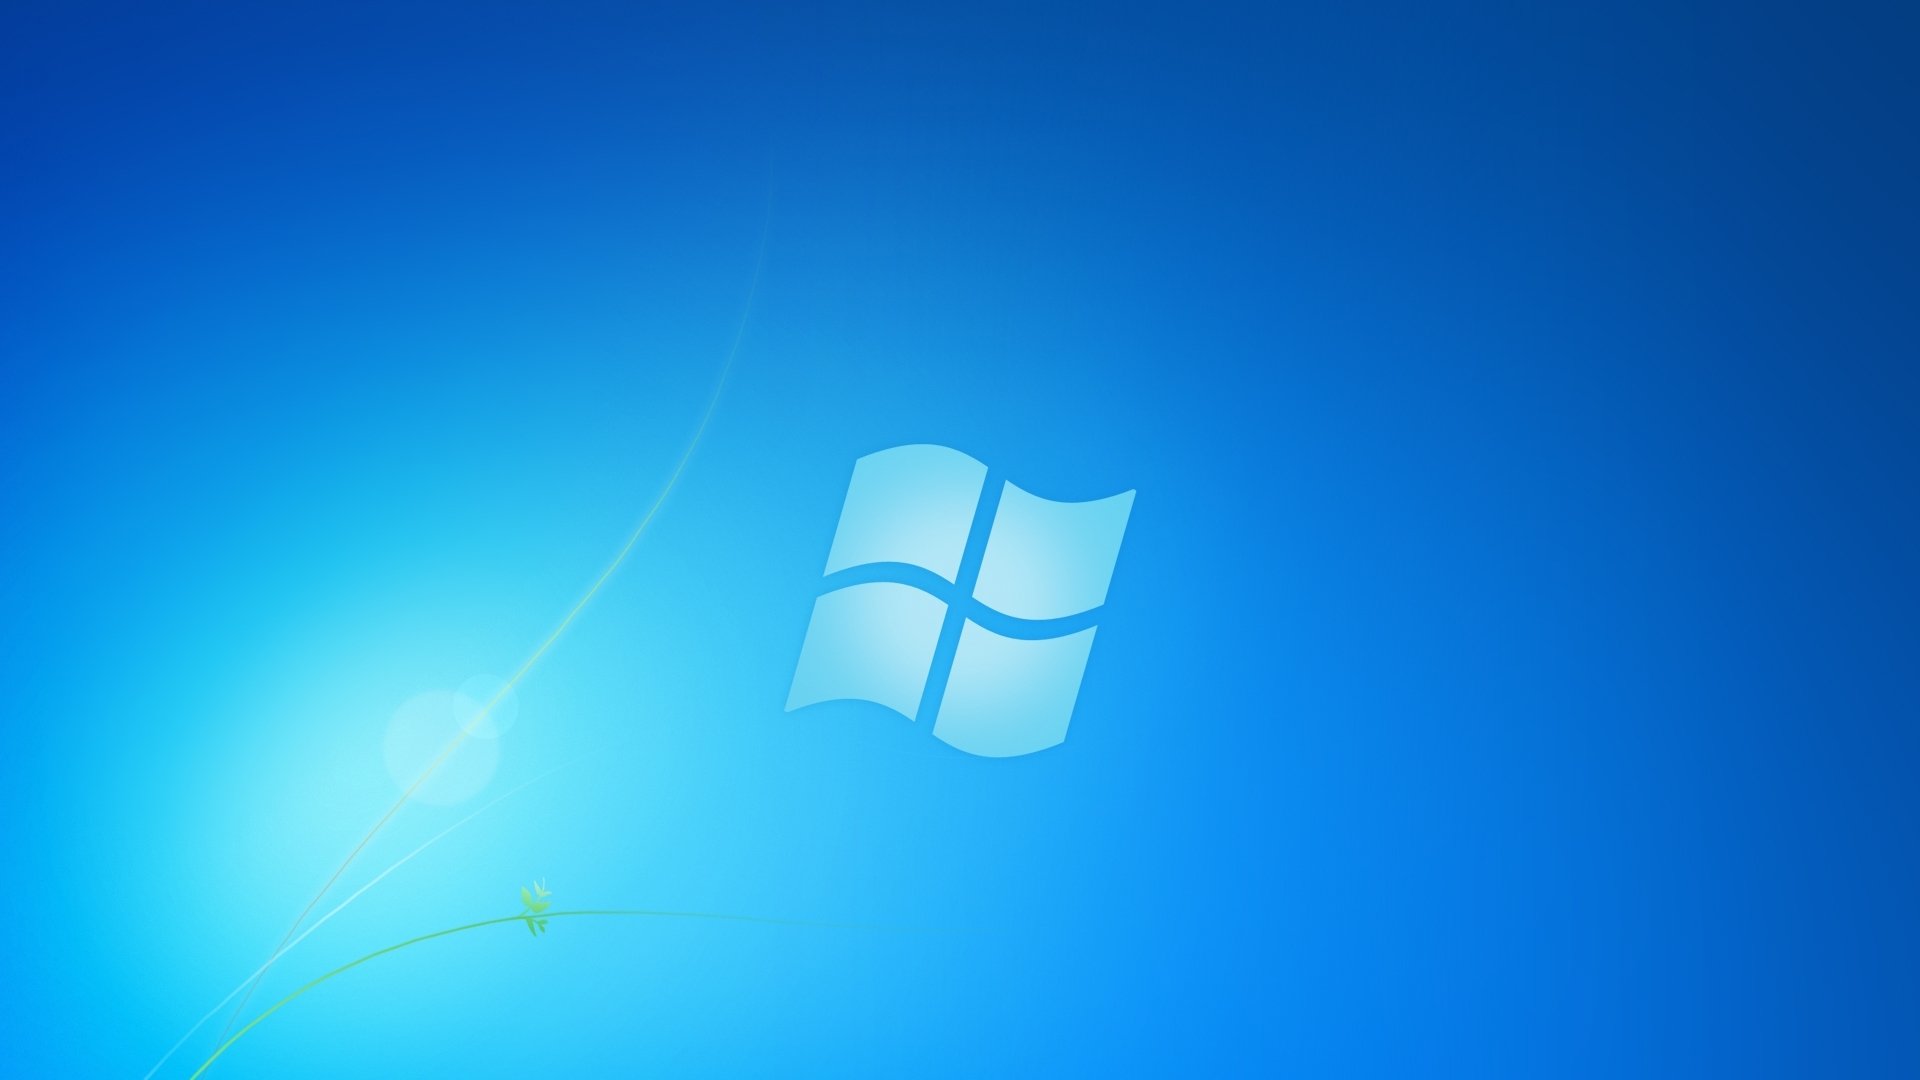 Wallpapers for windows 81